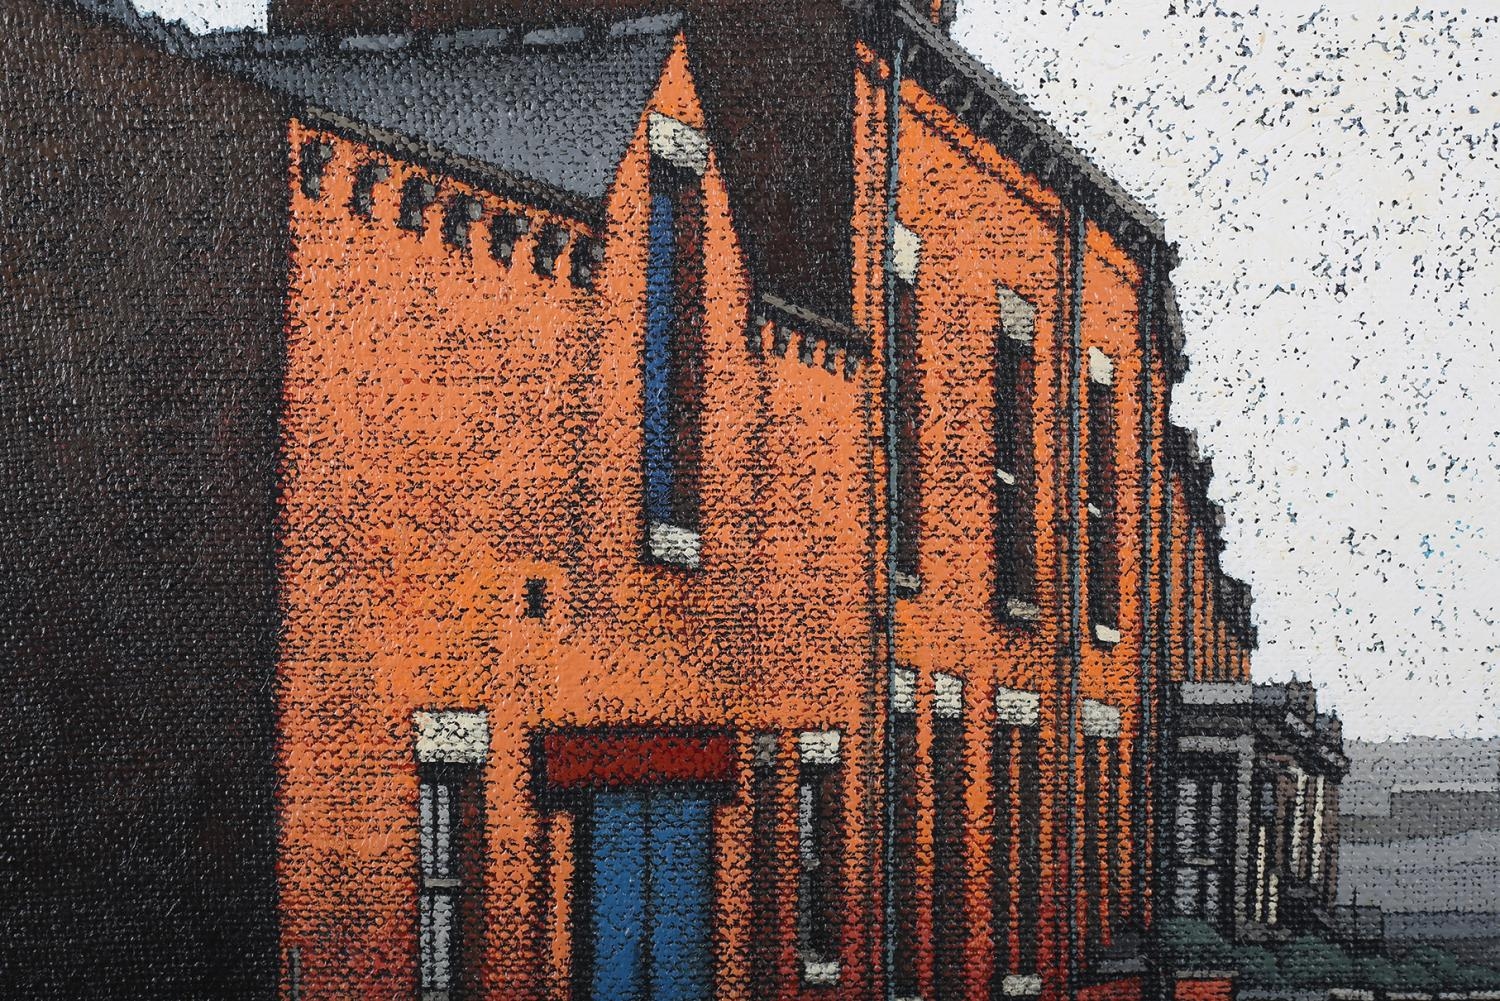 ARR Stuart Walton (b.1933), Red Brick Houses and Blue Painted Doors, Beeston, oil on board, signed - Image 3 of 6